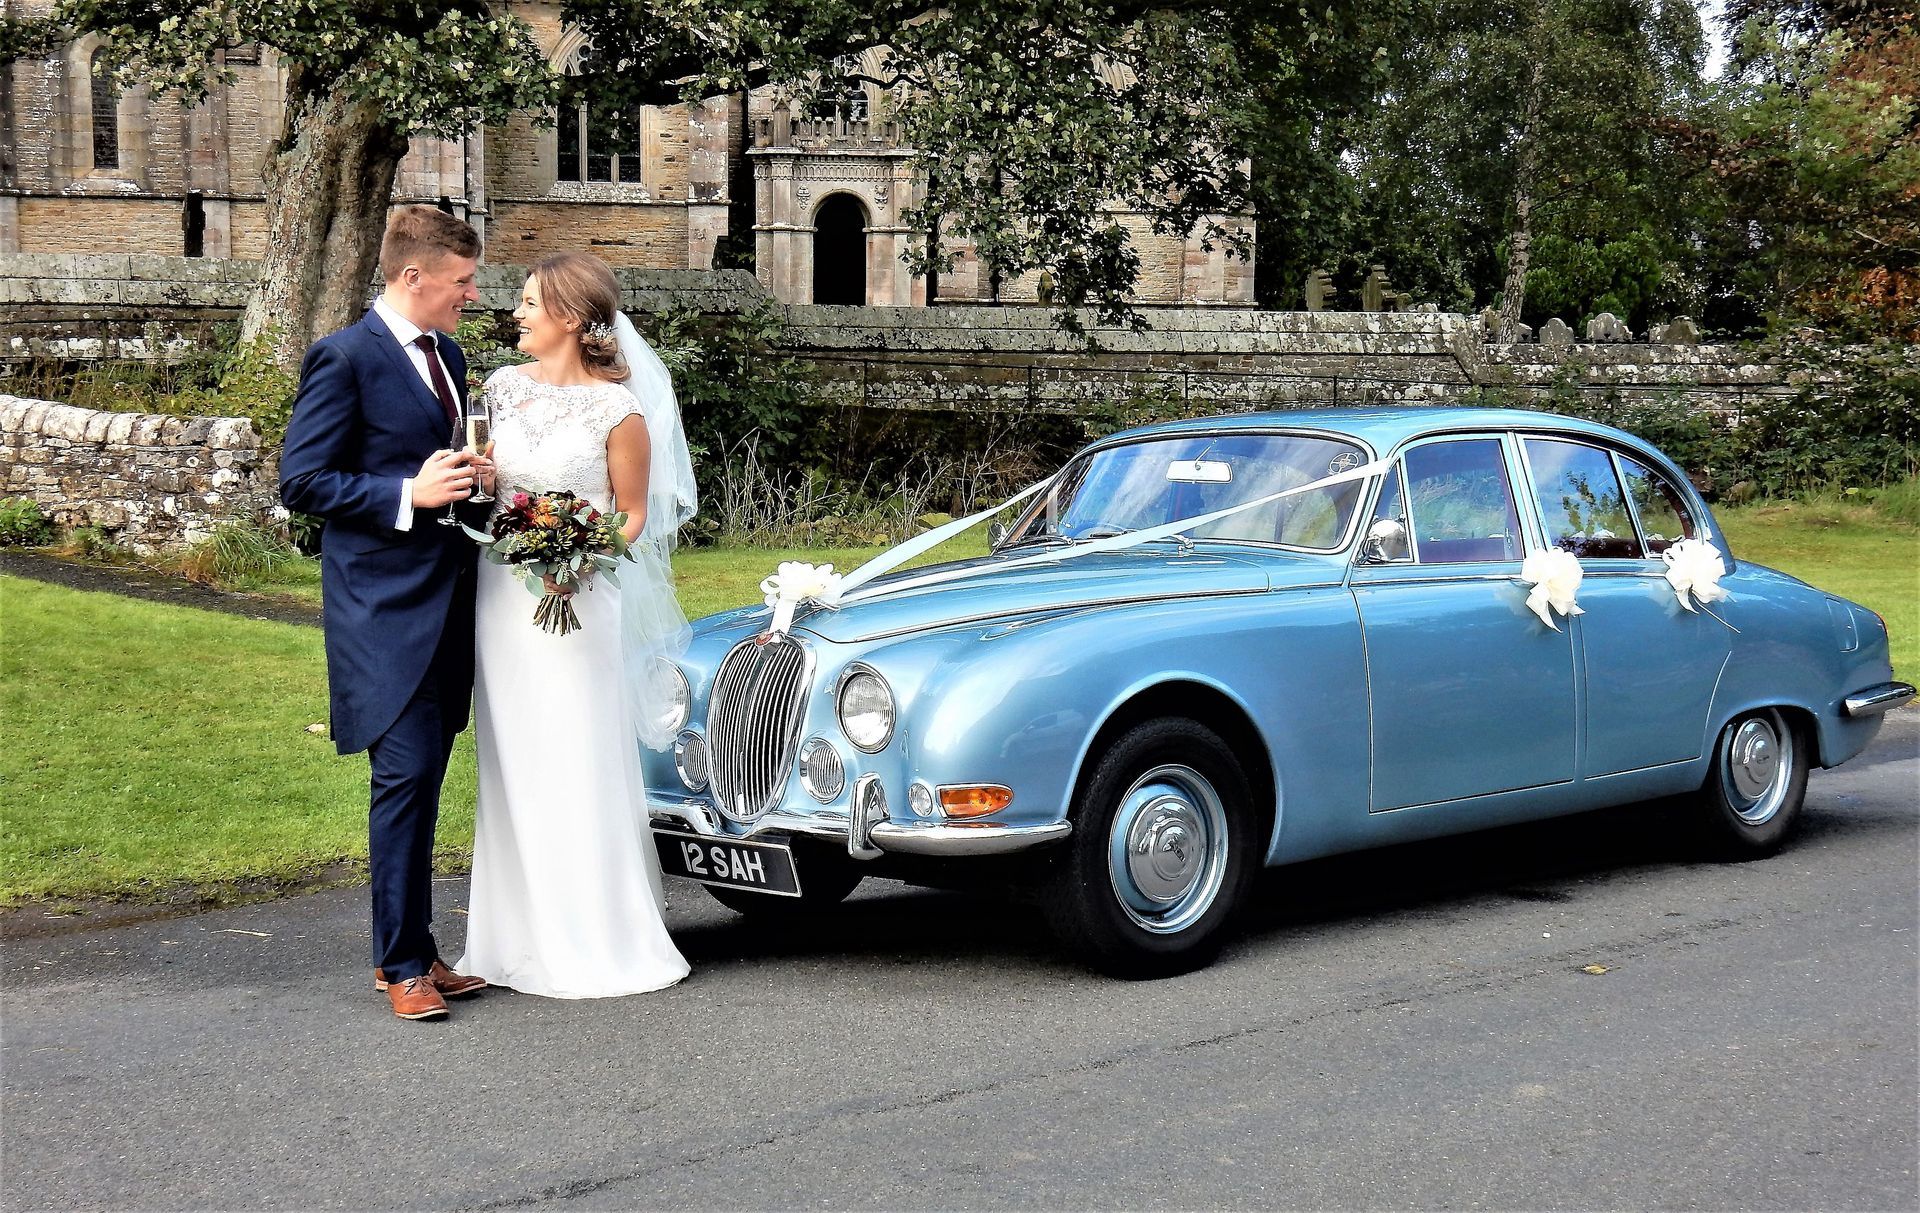 Newlywed couple joyfully toasting with a glass of fizz, gazing at each other beside their adorned light blue Jaguar MK2 wedding car with white bows.